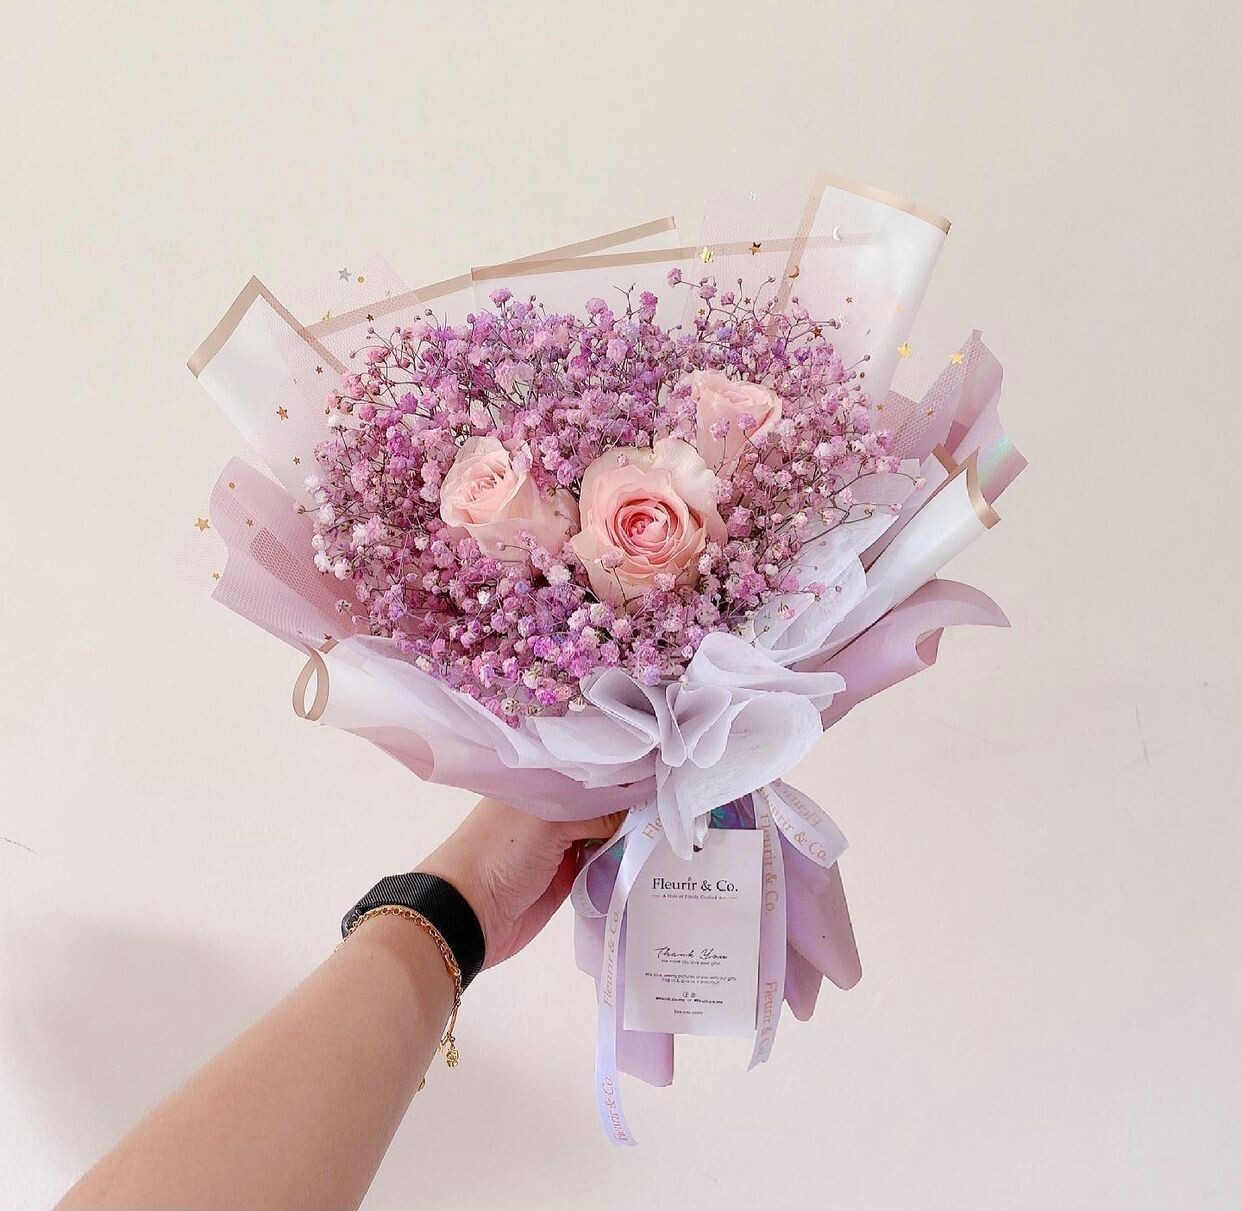 Signature Rose Baby’s Breath (By: Fleurir & Co from Kuching)